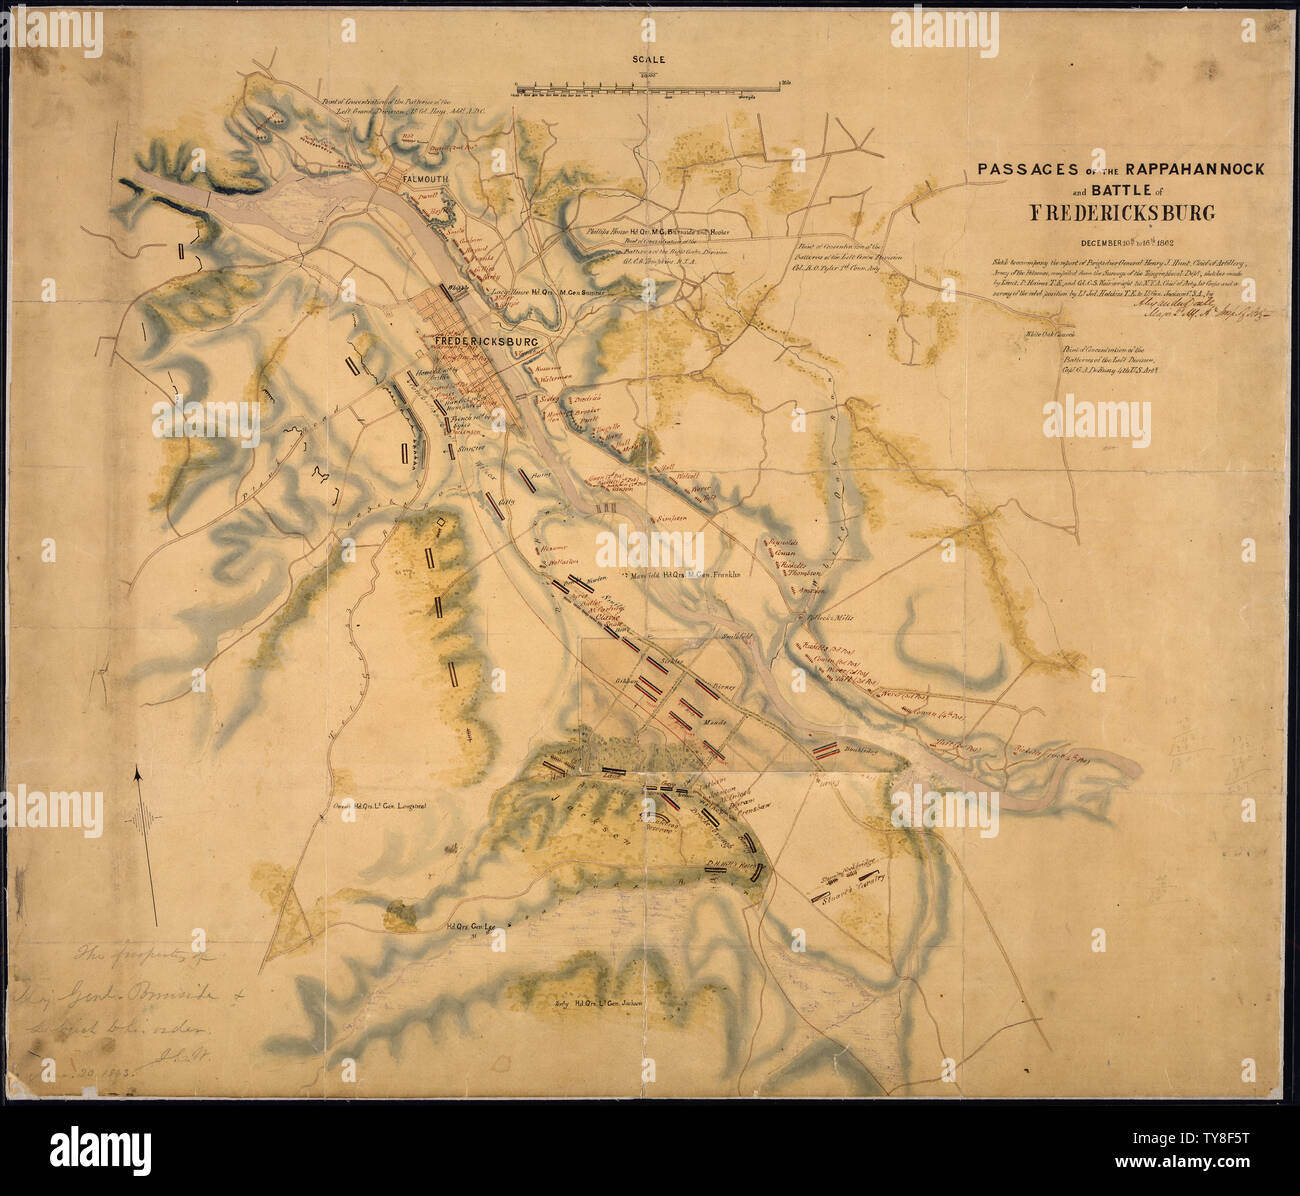 Map of the Passages of the Rappahannock and the Battle of Fredericksburg Stock Photo